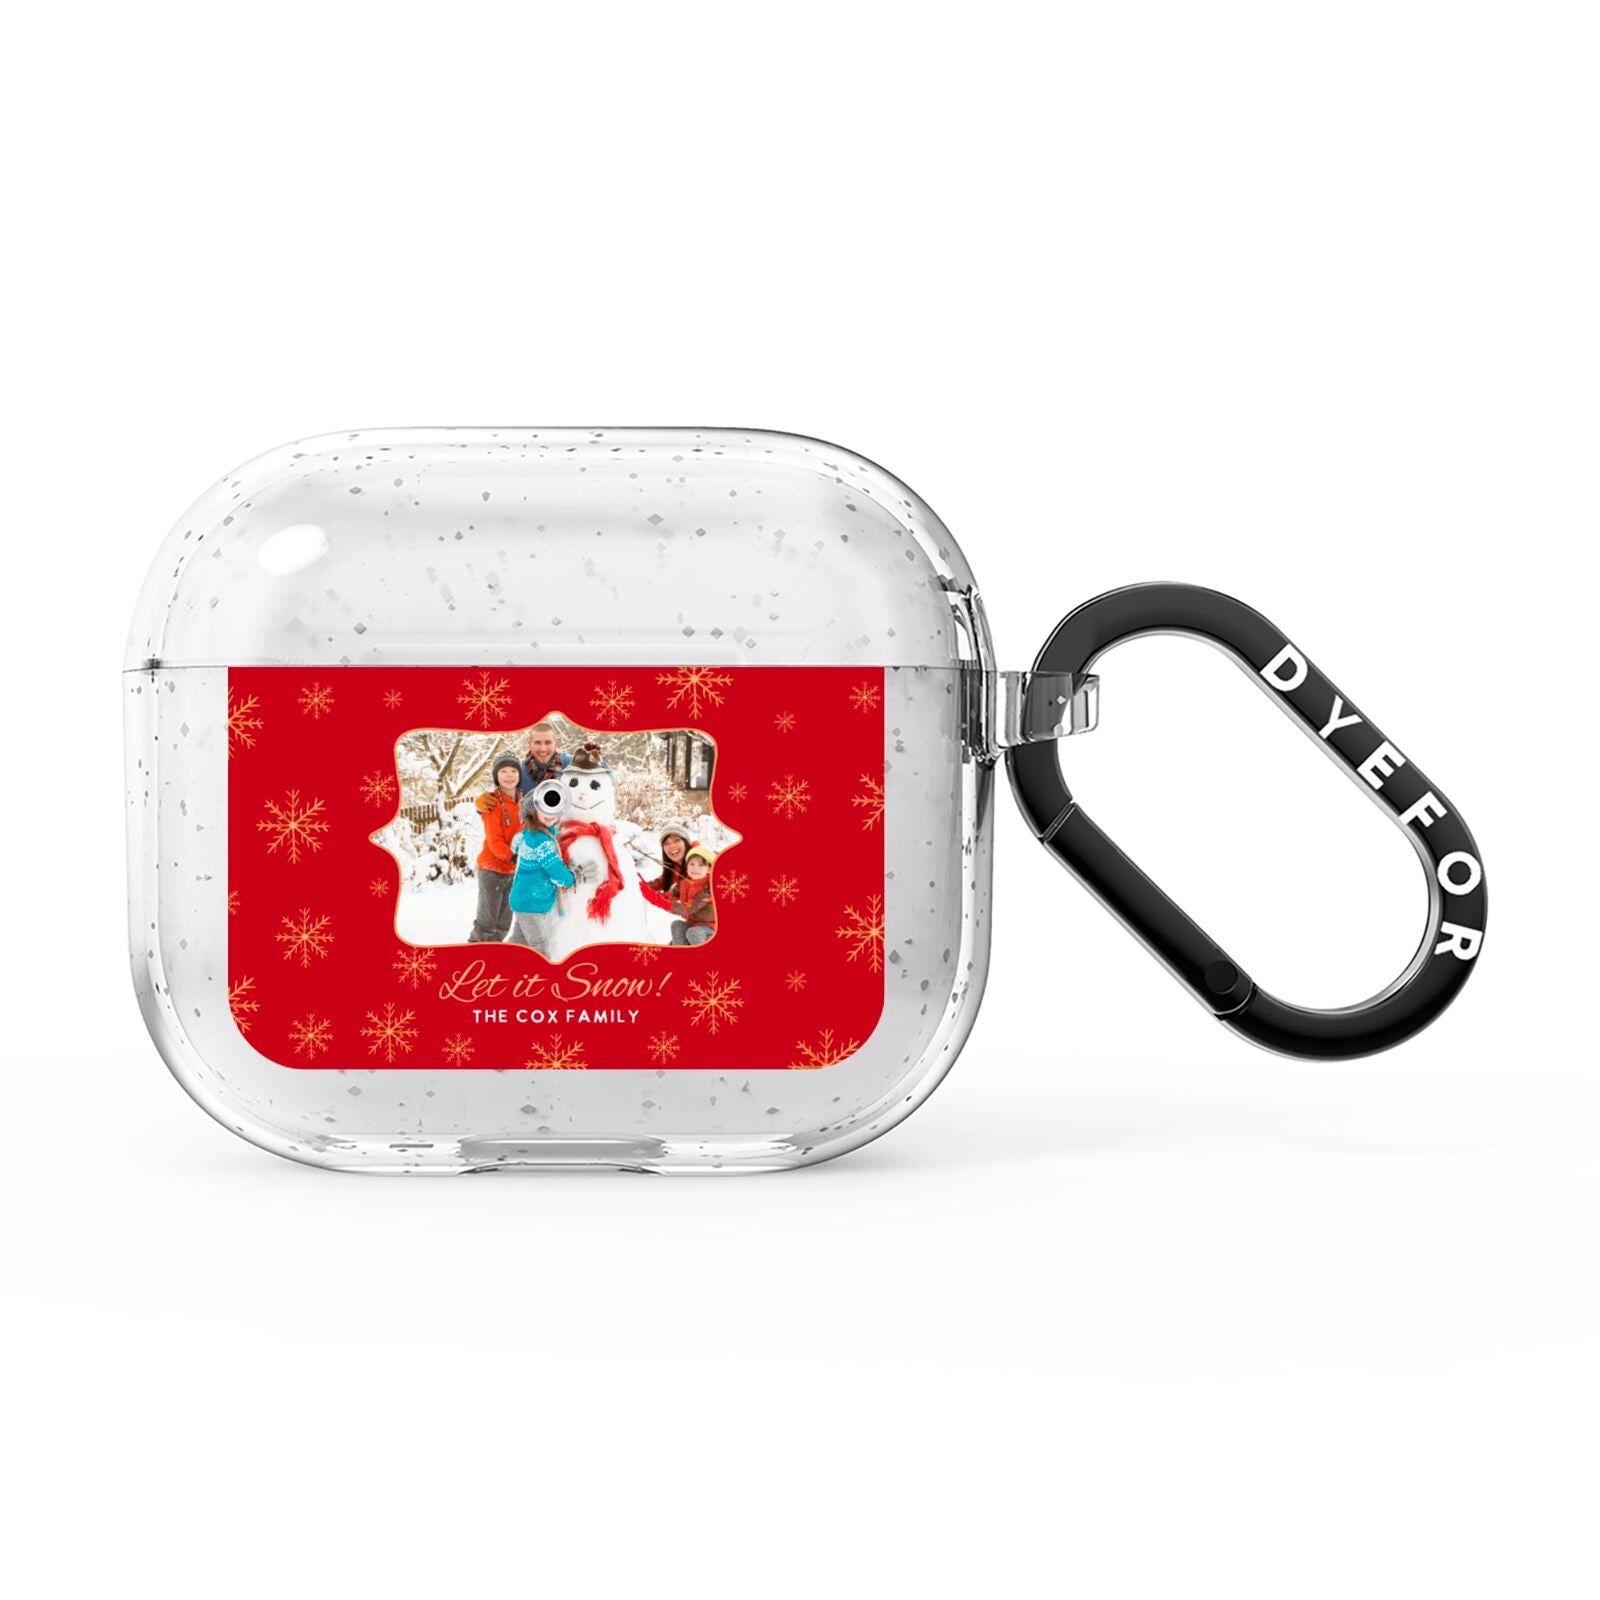 Let it Snow Christmas Photo Upload AirPods Glitter Case 3rd Gen